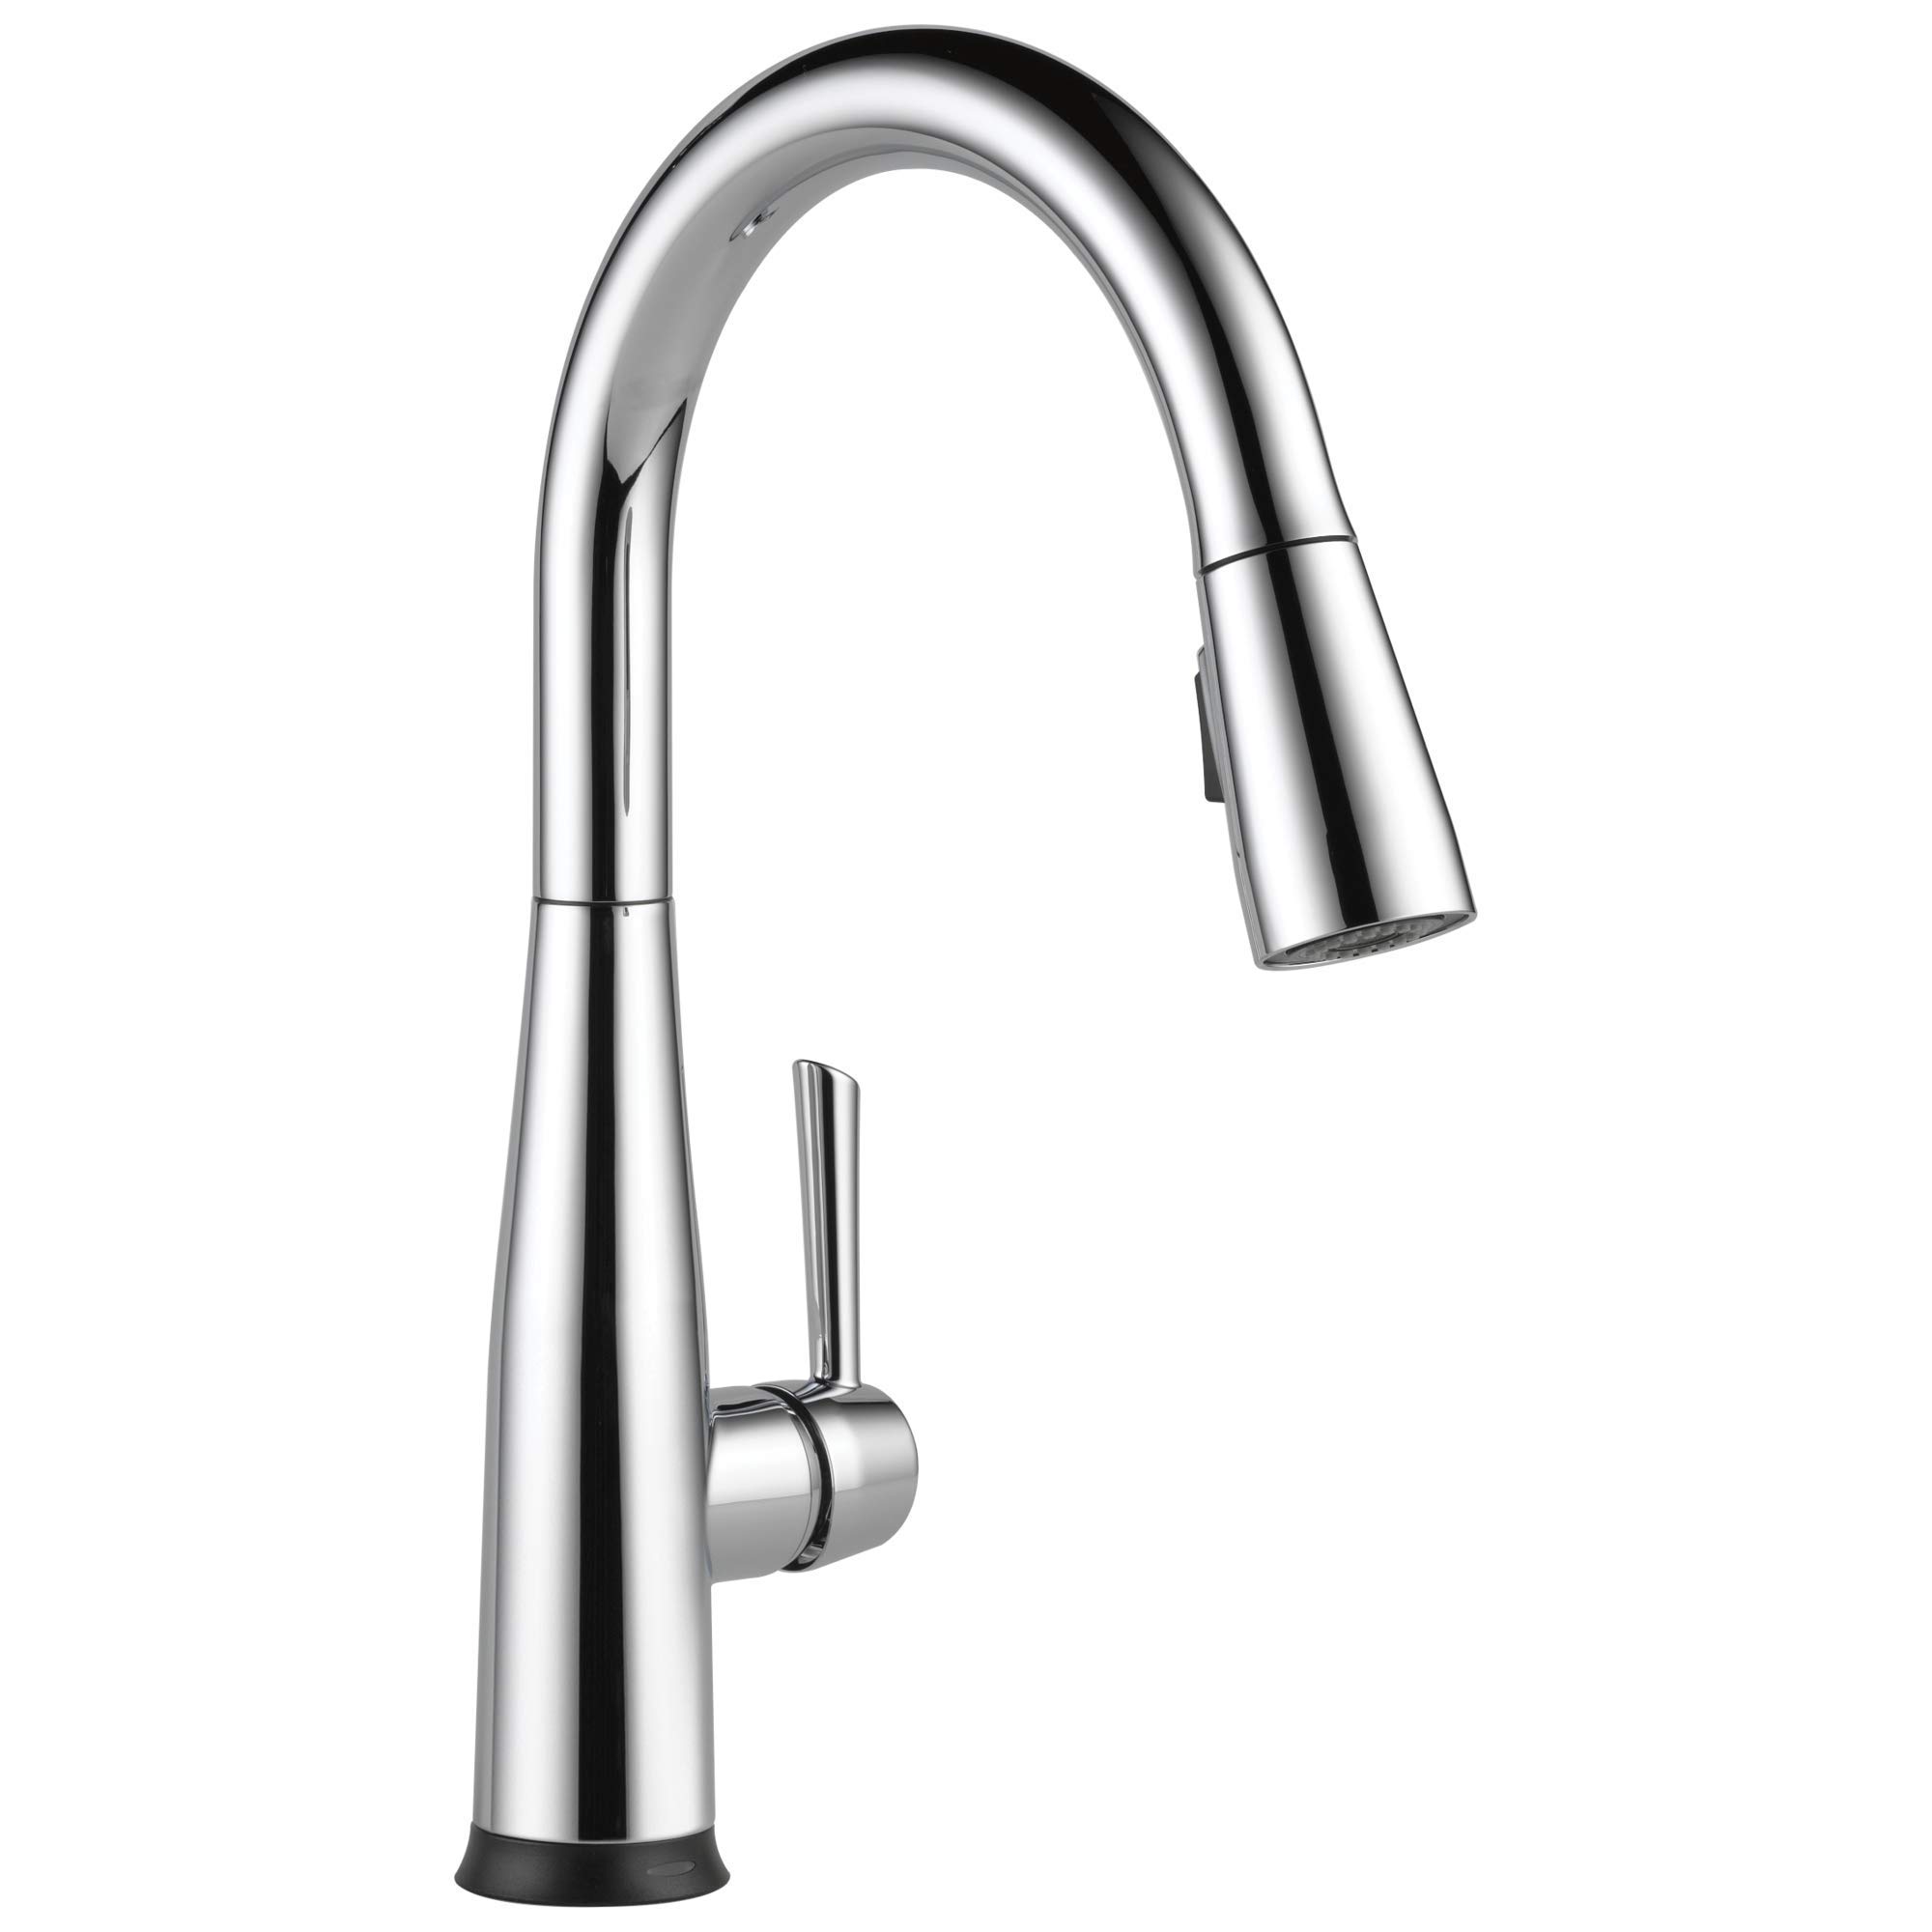 Delta Faucet Essa Touch Kitchen Faucet Chrome, Chrome Kitchen Faucets with Pull Down Sprayer, Kitchen Sink Faucet, Touch Faucet for Kitchen Sink, Delta Touch2O Technology, Chrome 9113T-DST